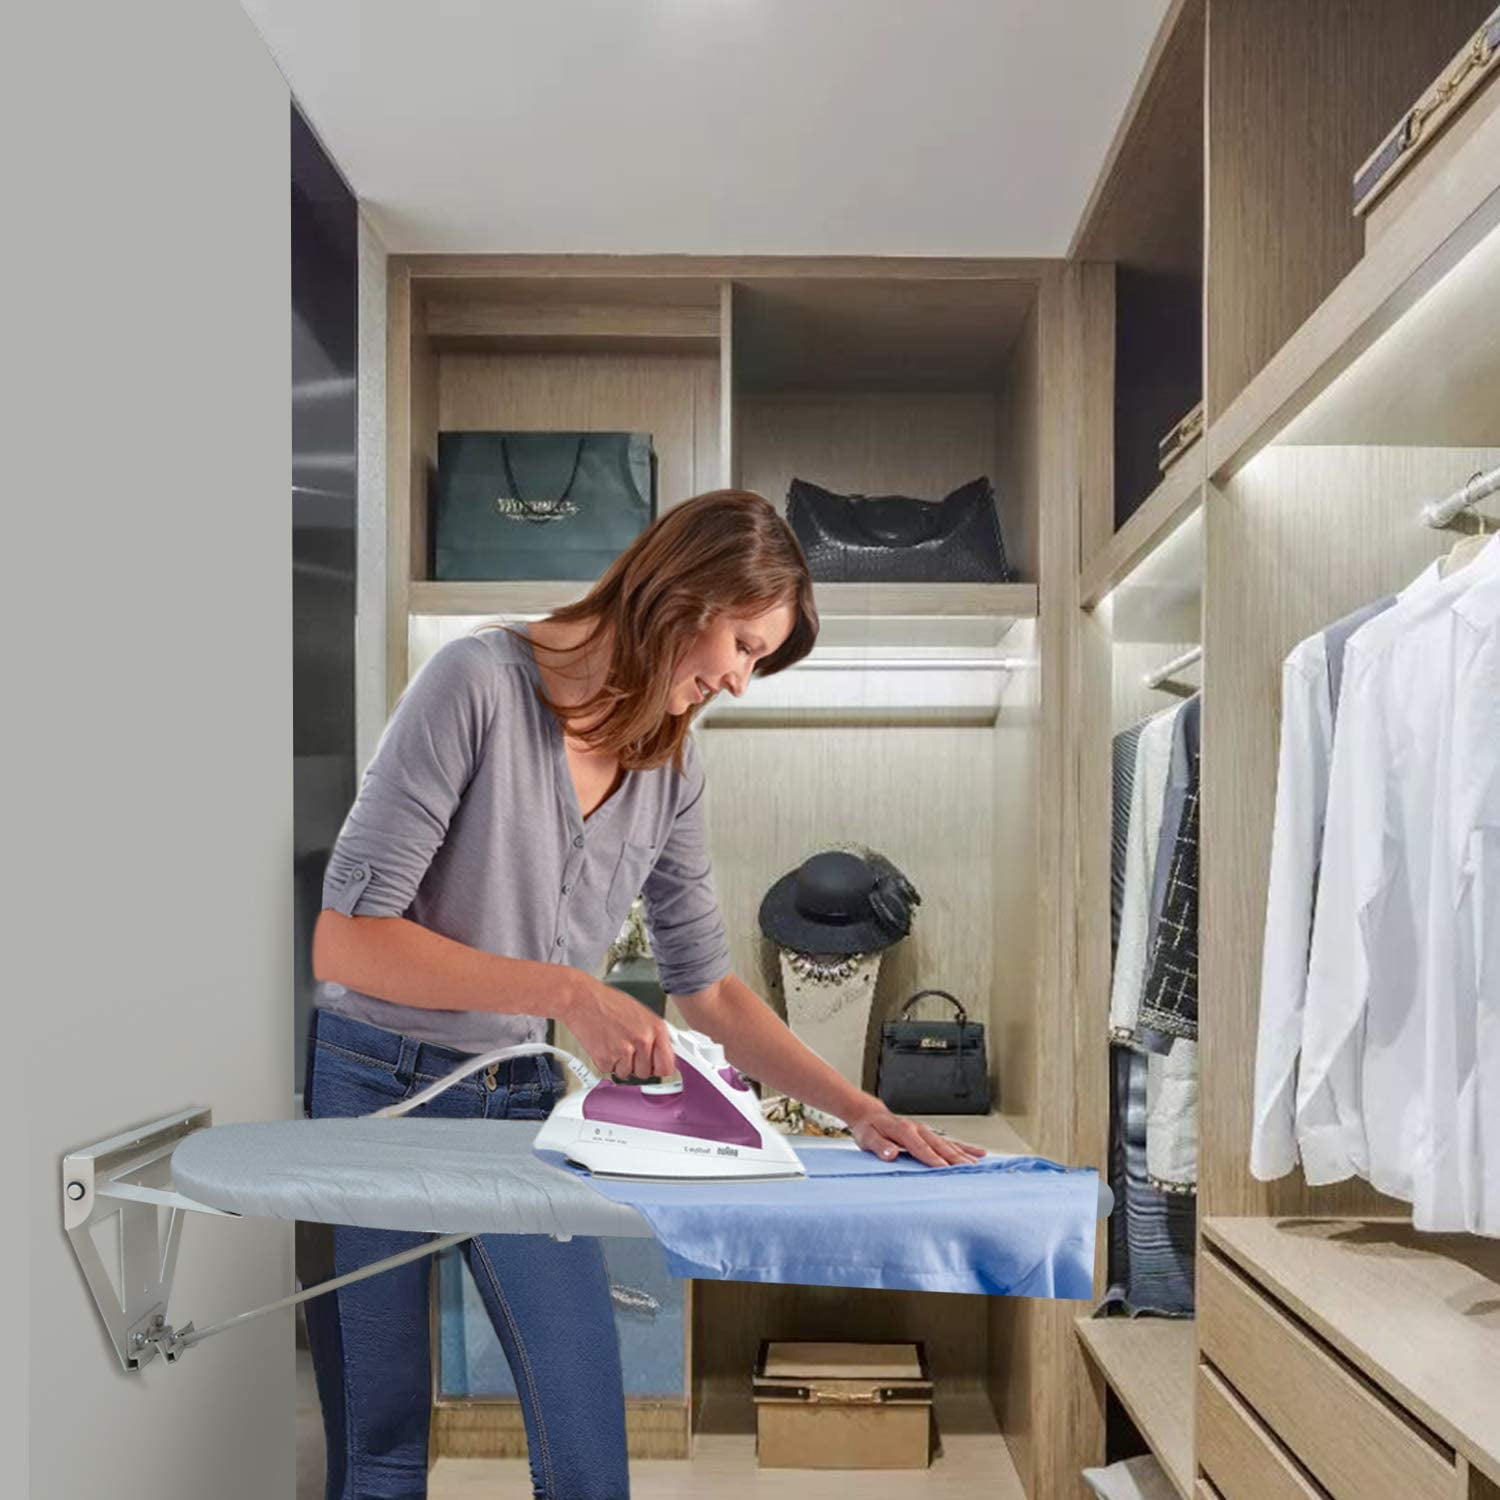 Wall mount Ironing Board for Laundry Room Organizer-Space saver-Foldable. 